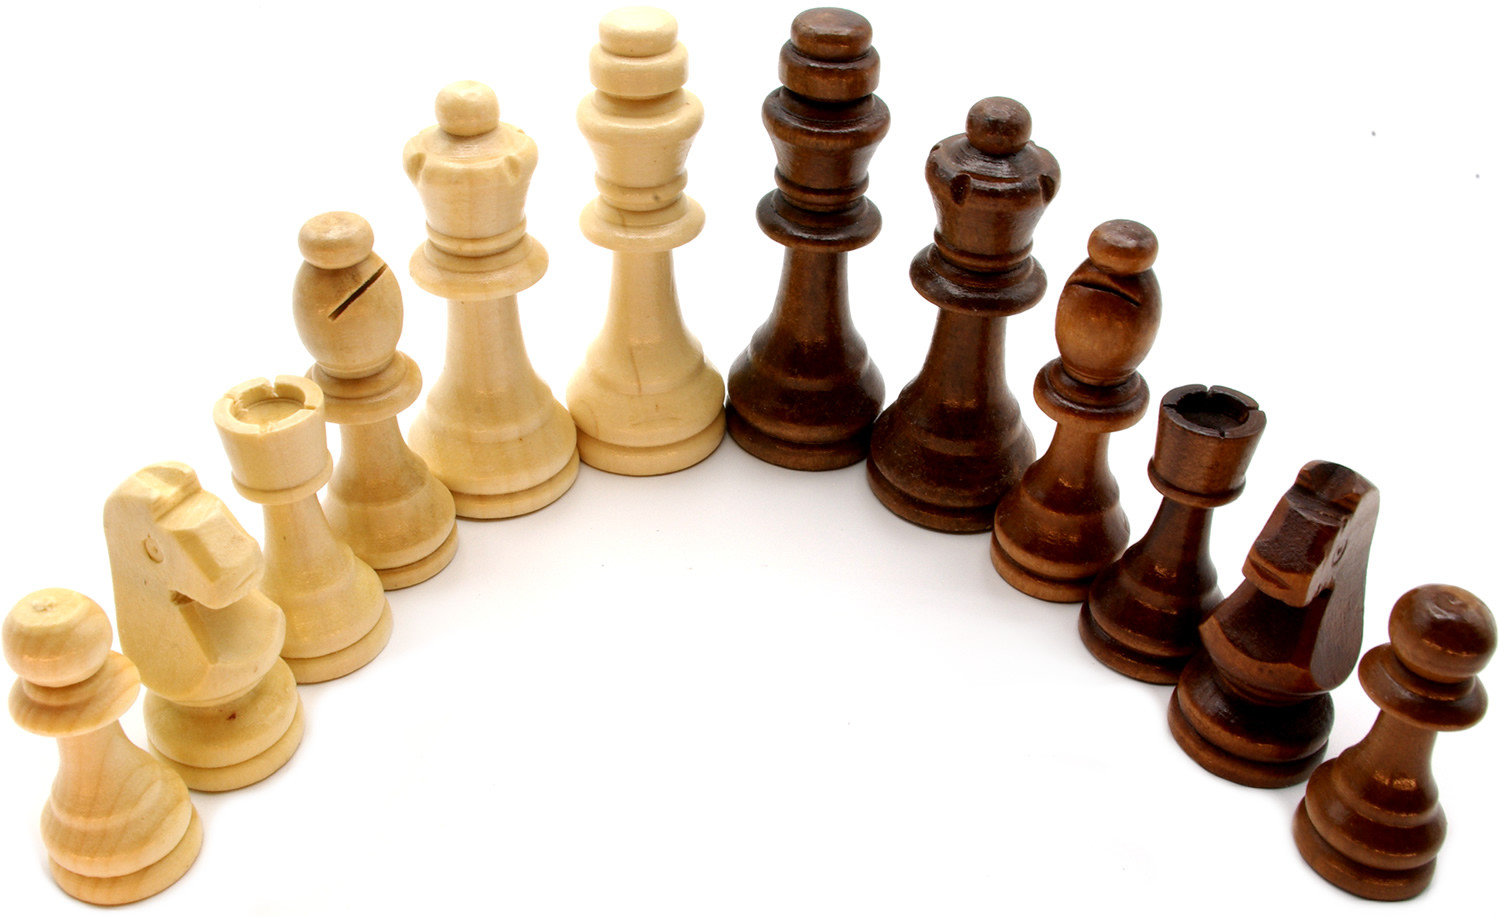 No.4 (85mm) wood Chess pieces / Chessmen